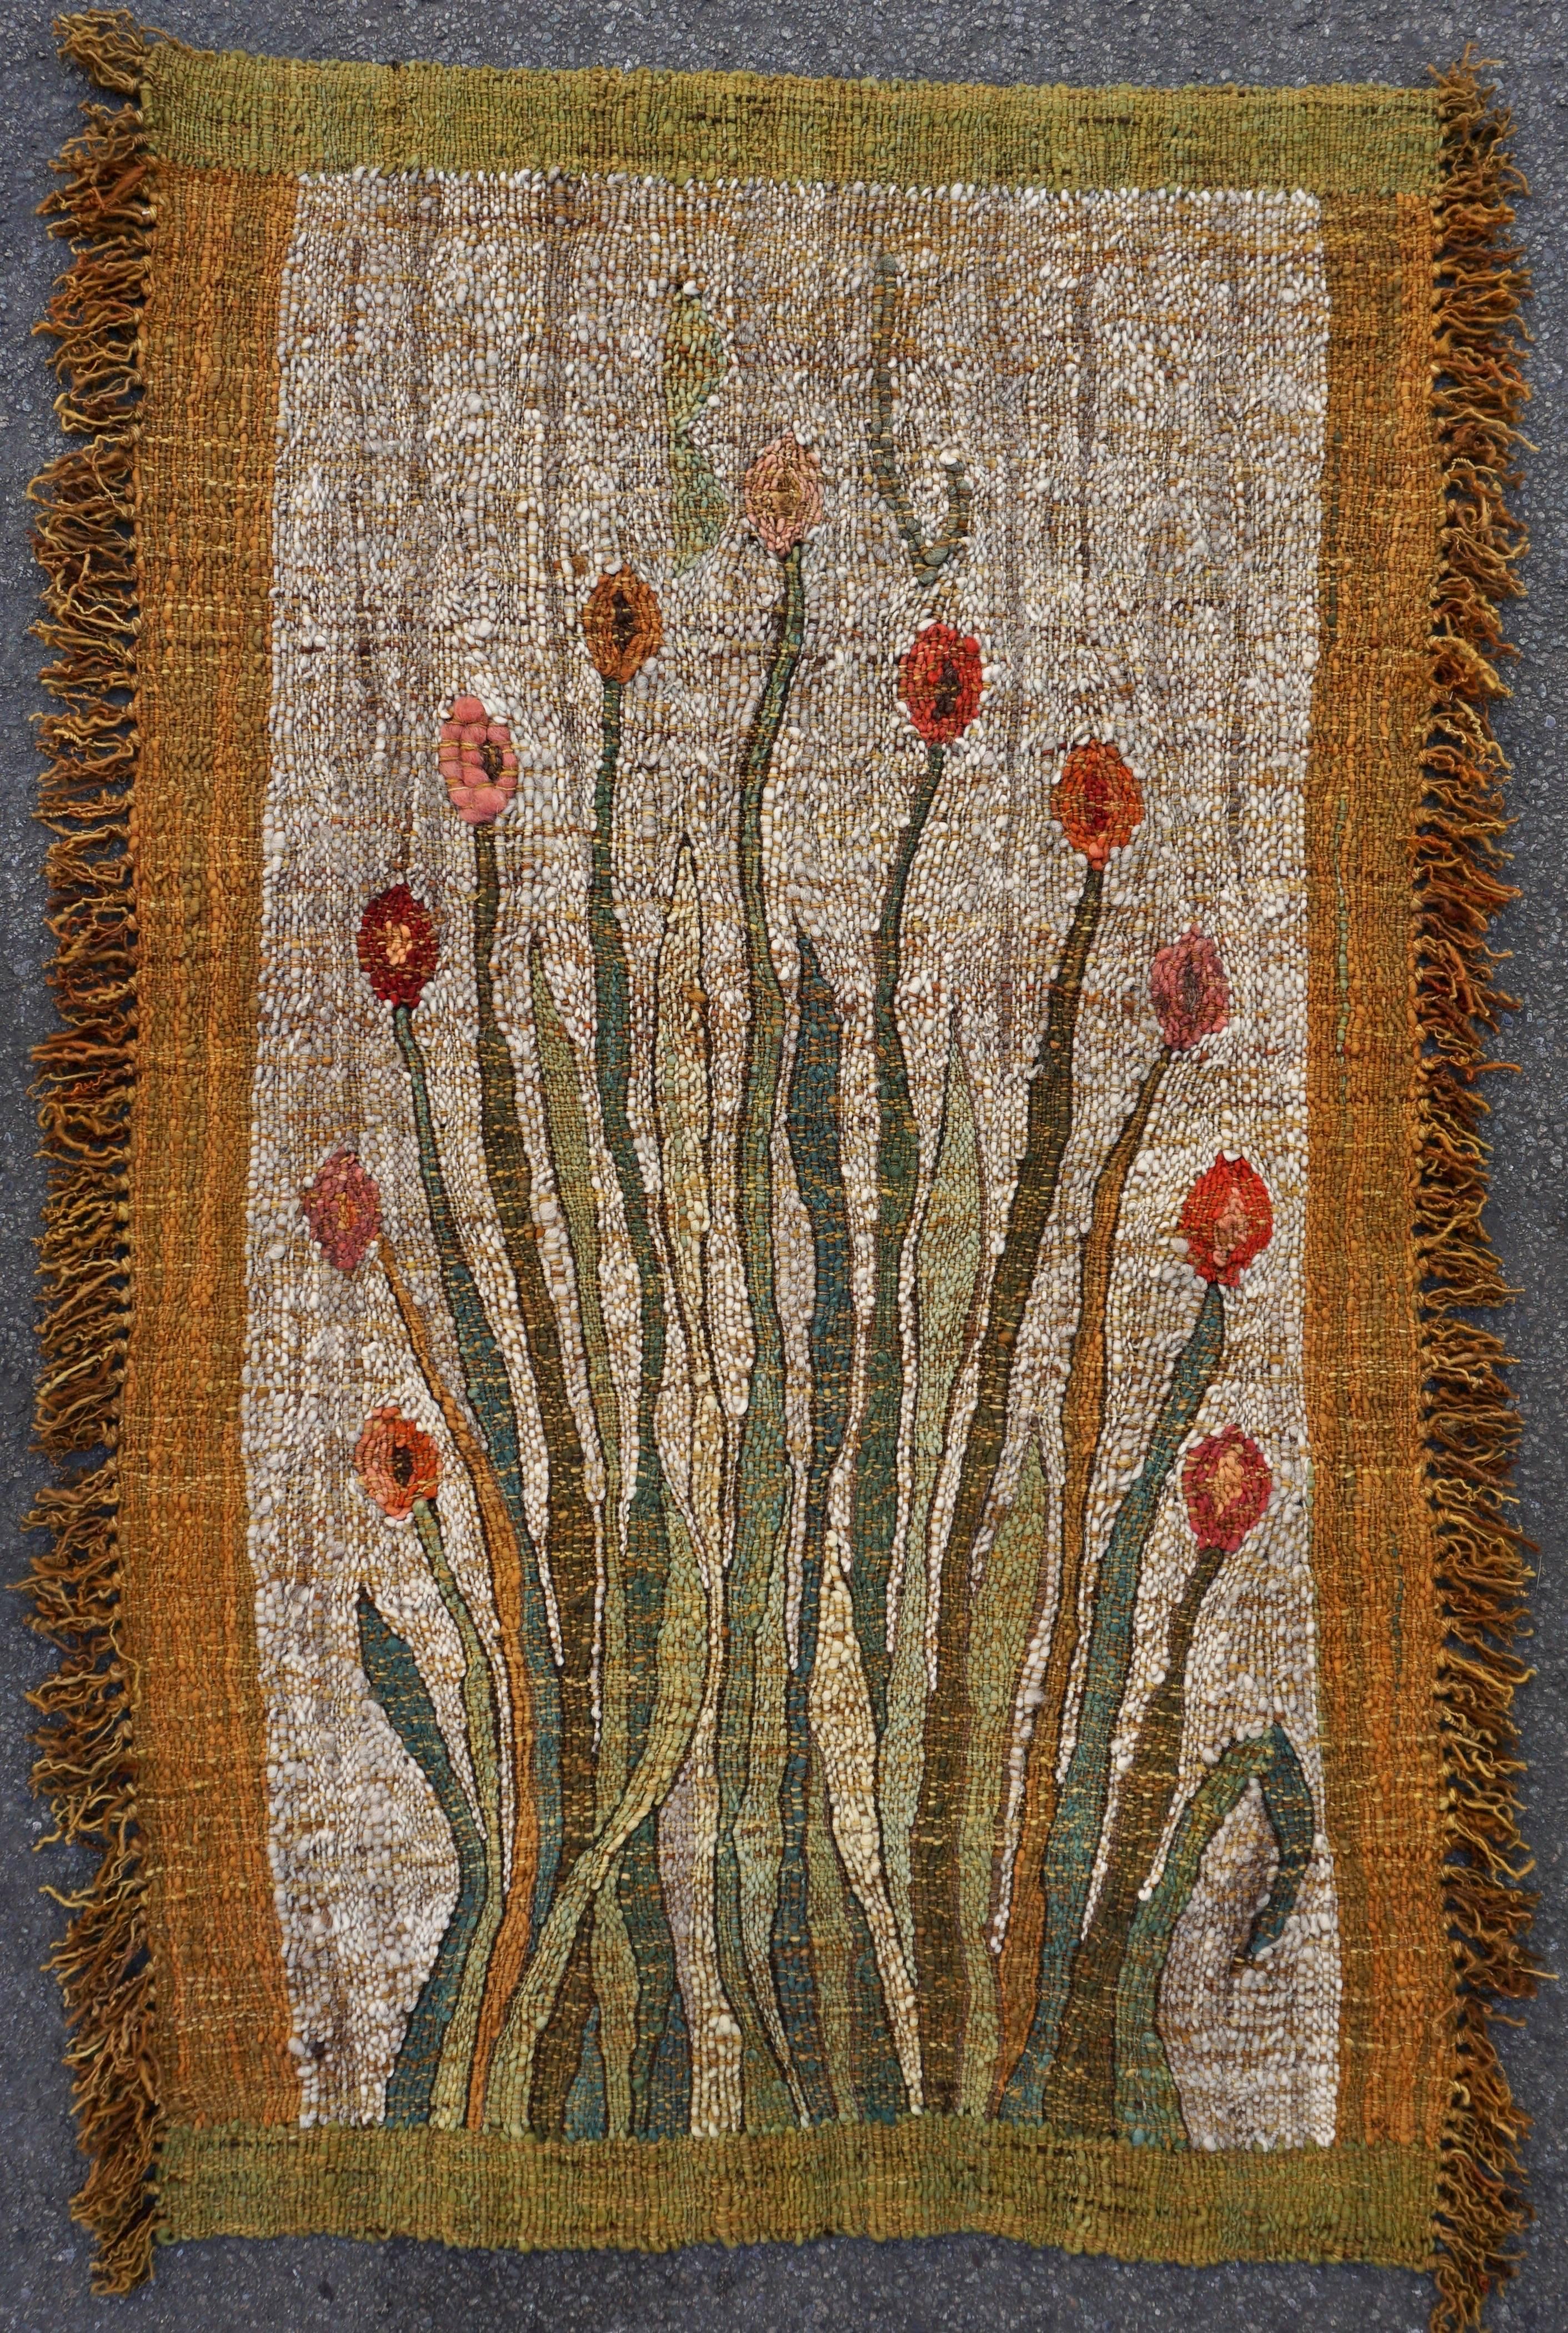 Flower tapestry by Barbara Latocha. Poland 1979.
Measures: Height 140 cm.
Width 90 cm.